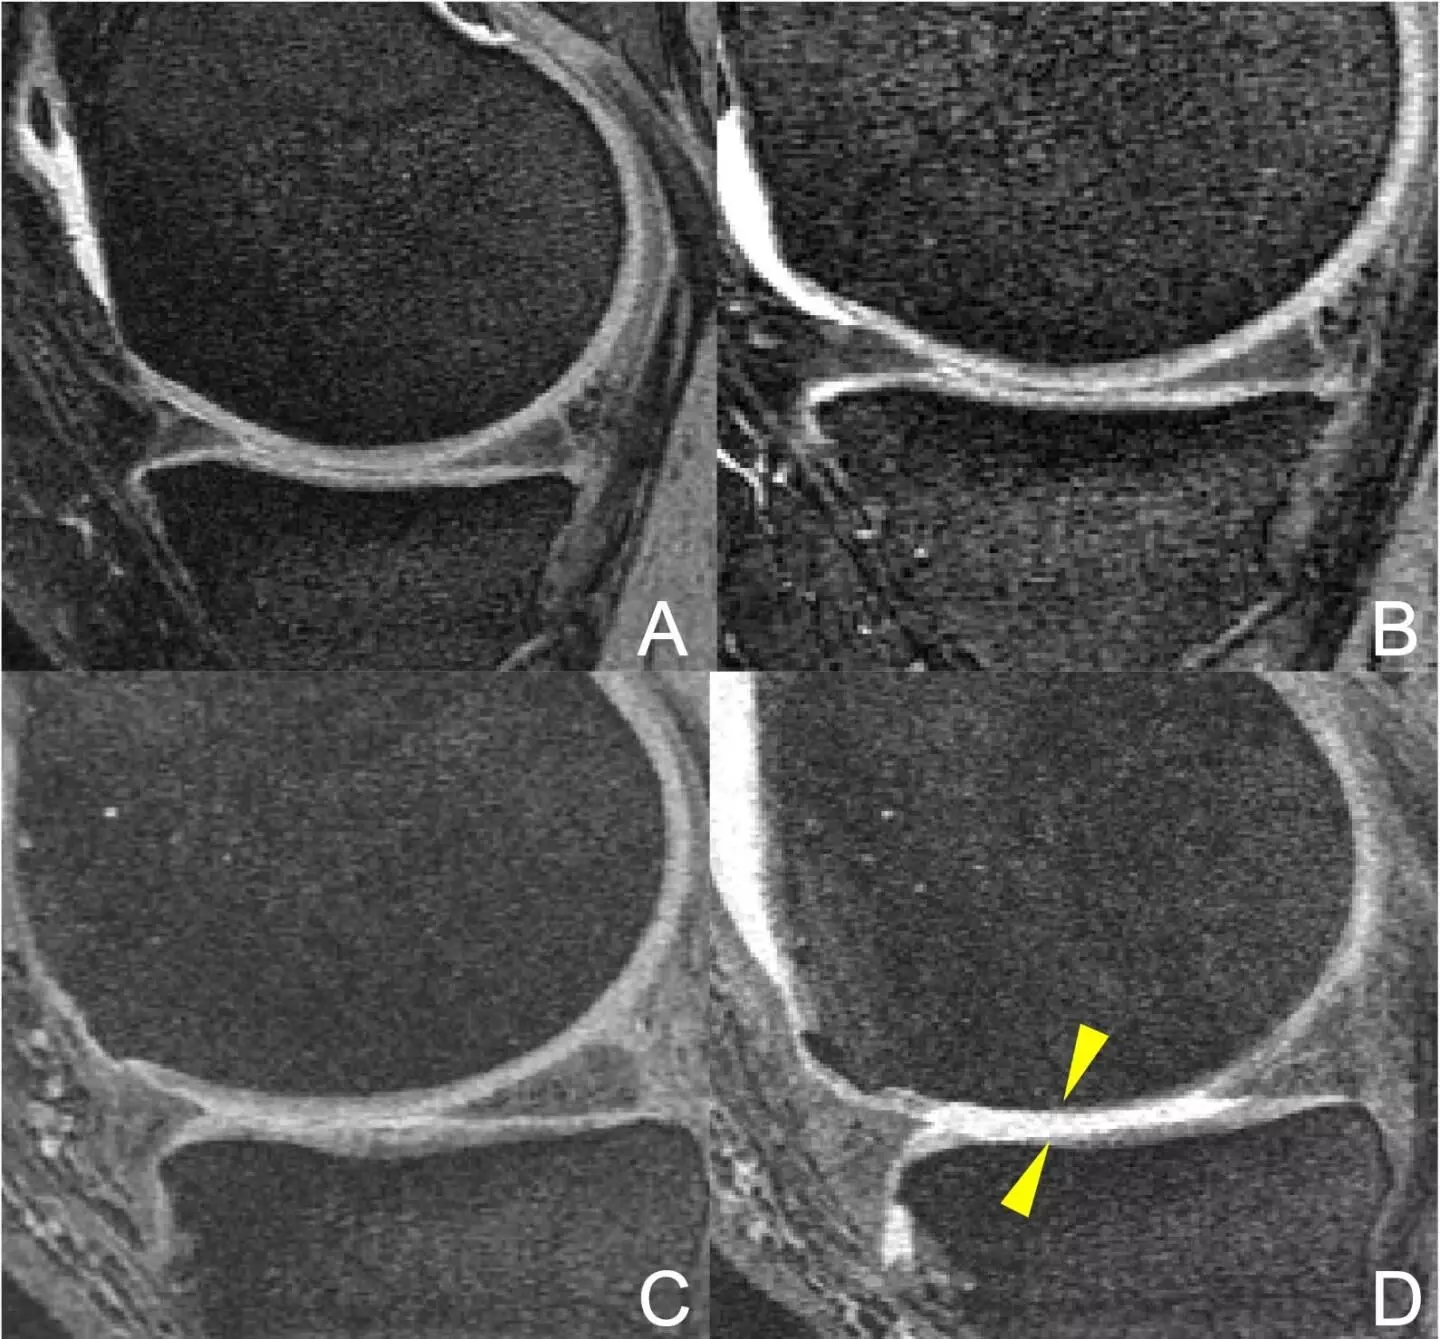 Racket sports rapidly destroy cartilage in knee osteoarthritis in obese, finds MRI study